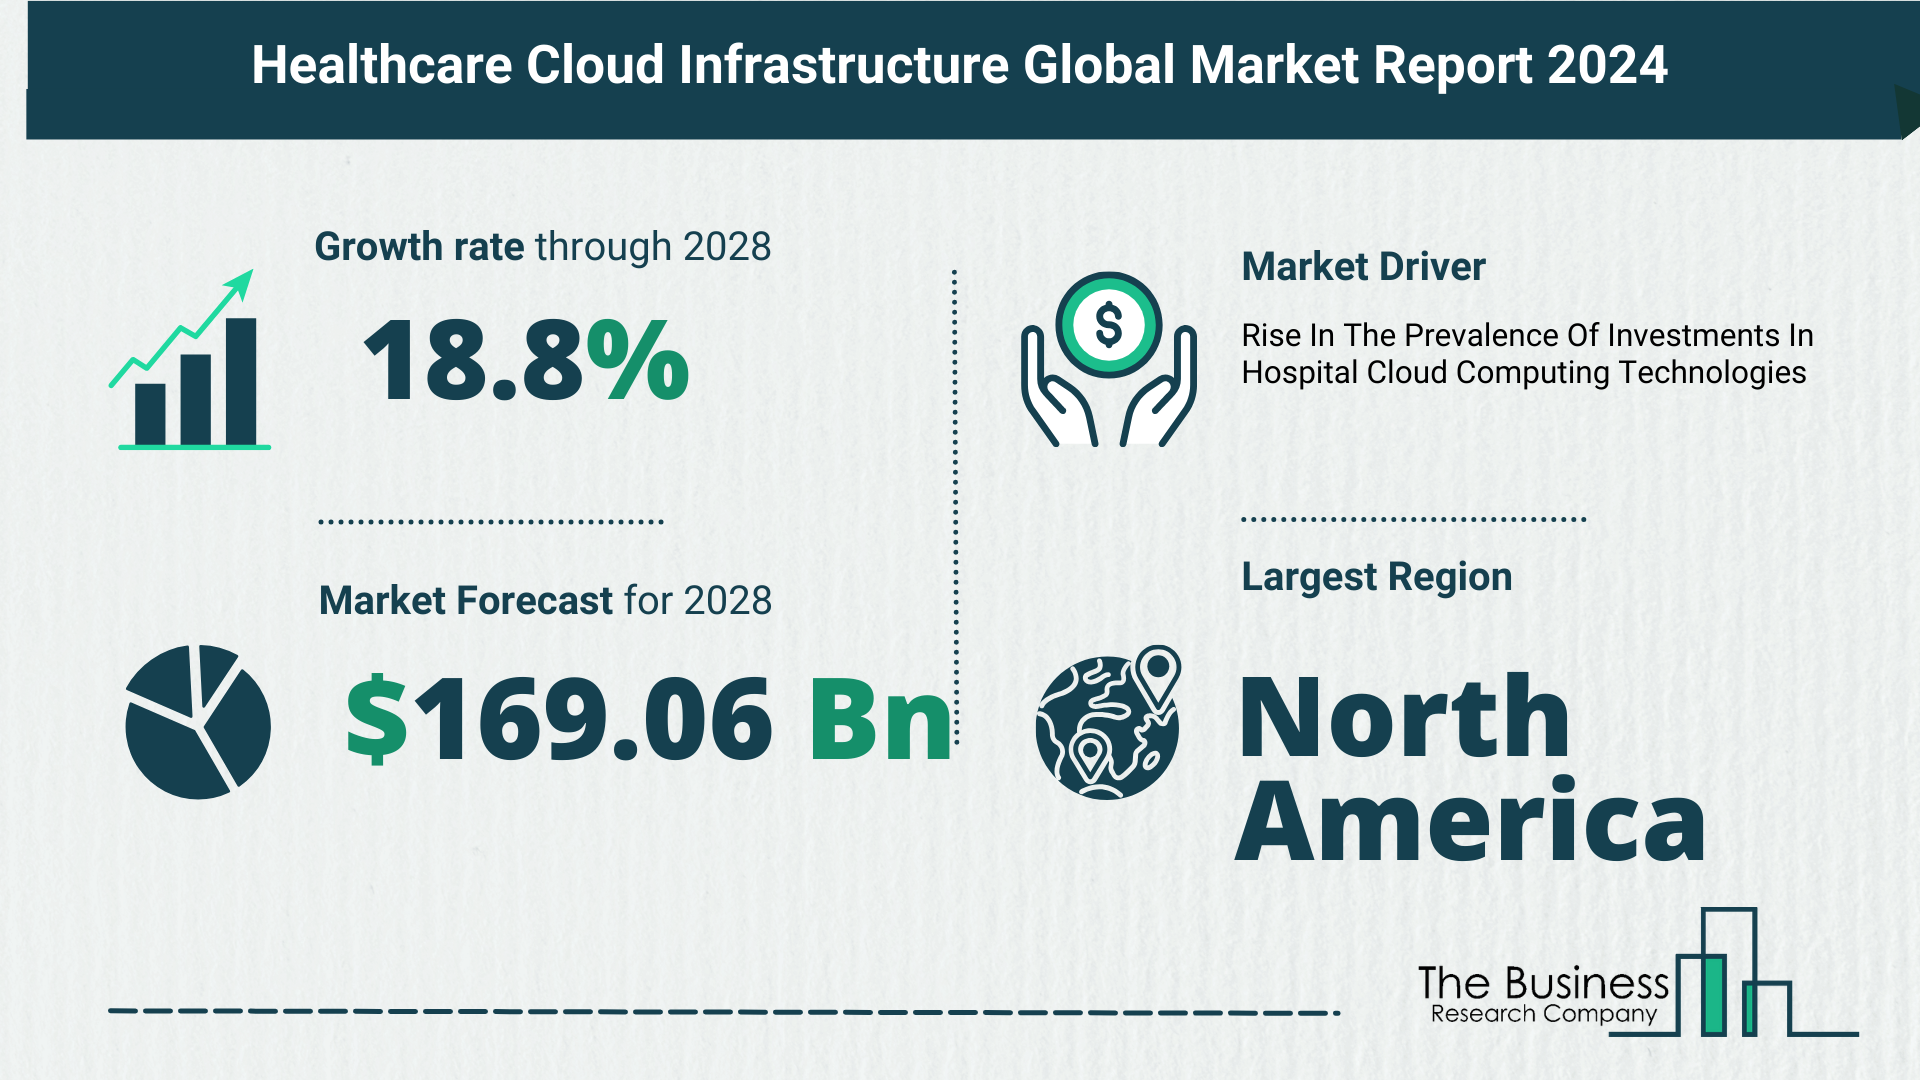 Understand How The Healthcare Cloud Infrastructure Market Is Poised To Grow Through 2024-2033